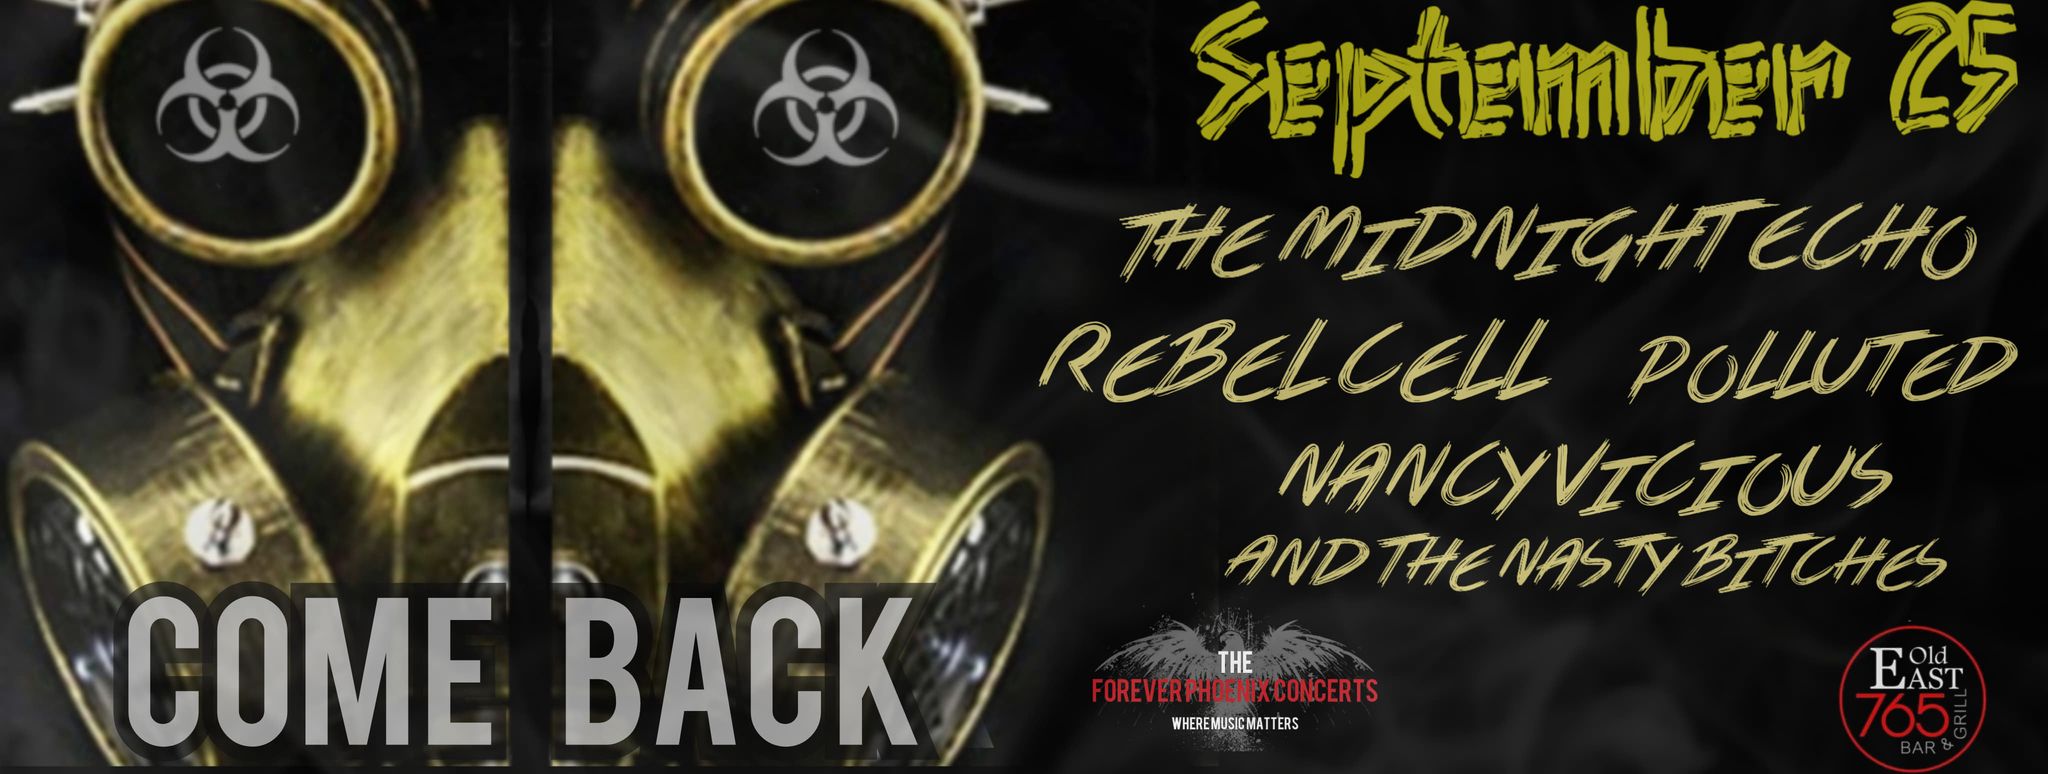 The Forever Phoenix Concerts Presents Come Back Show Rebel Cell